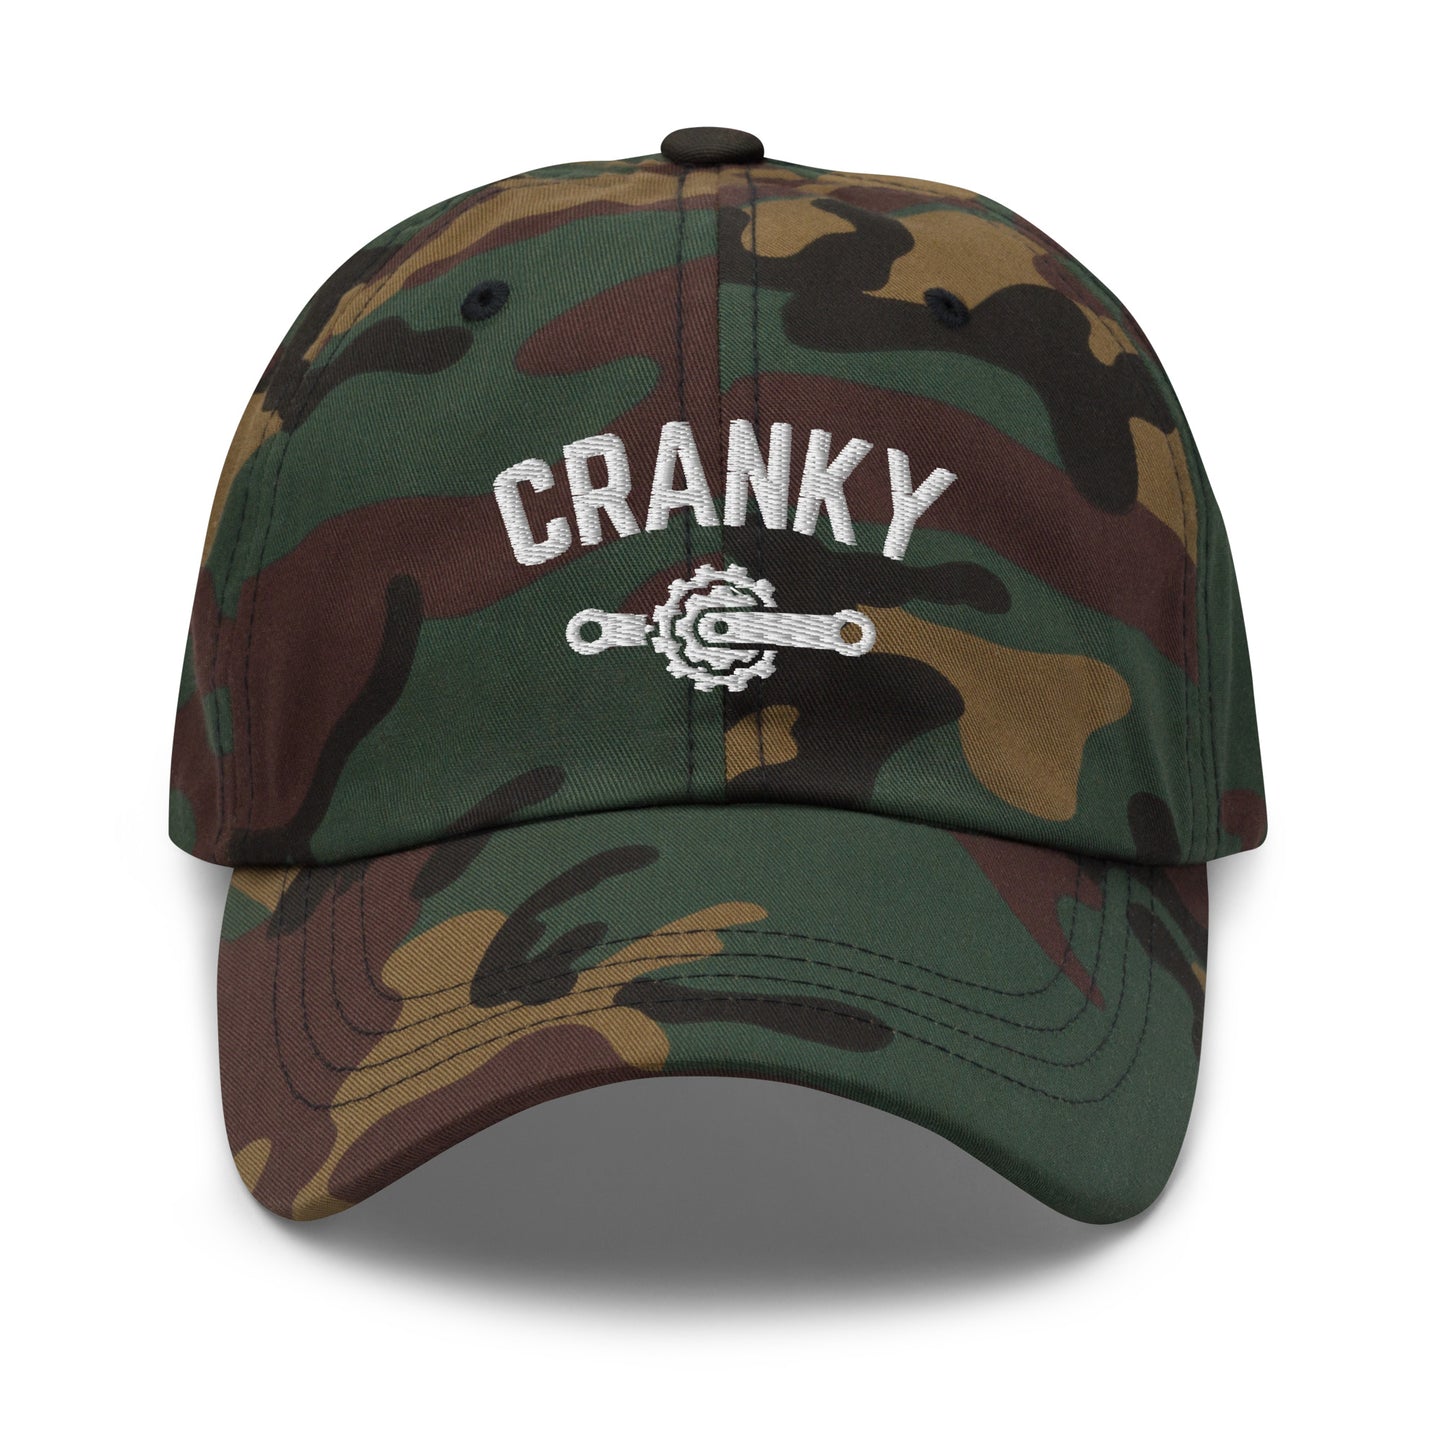 Cranky Dad Hat, Cycling Cap, Funny Bike Hat, Bike Lover Gift, Cycling Gift, Cyclist Clothes, BMX, Mountain Bike Hat